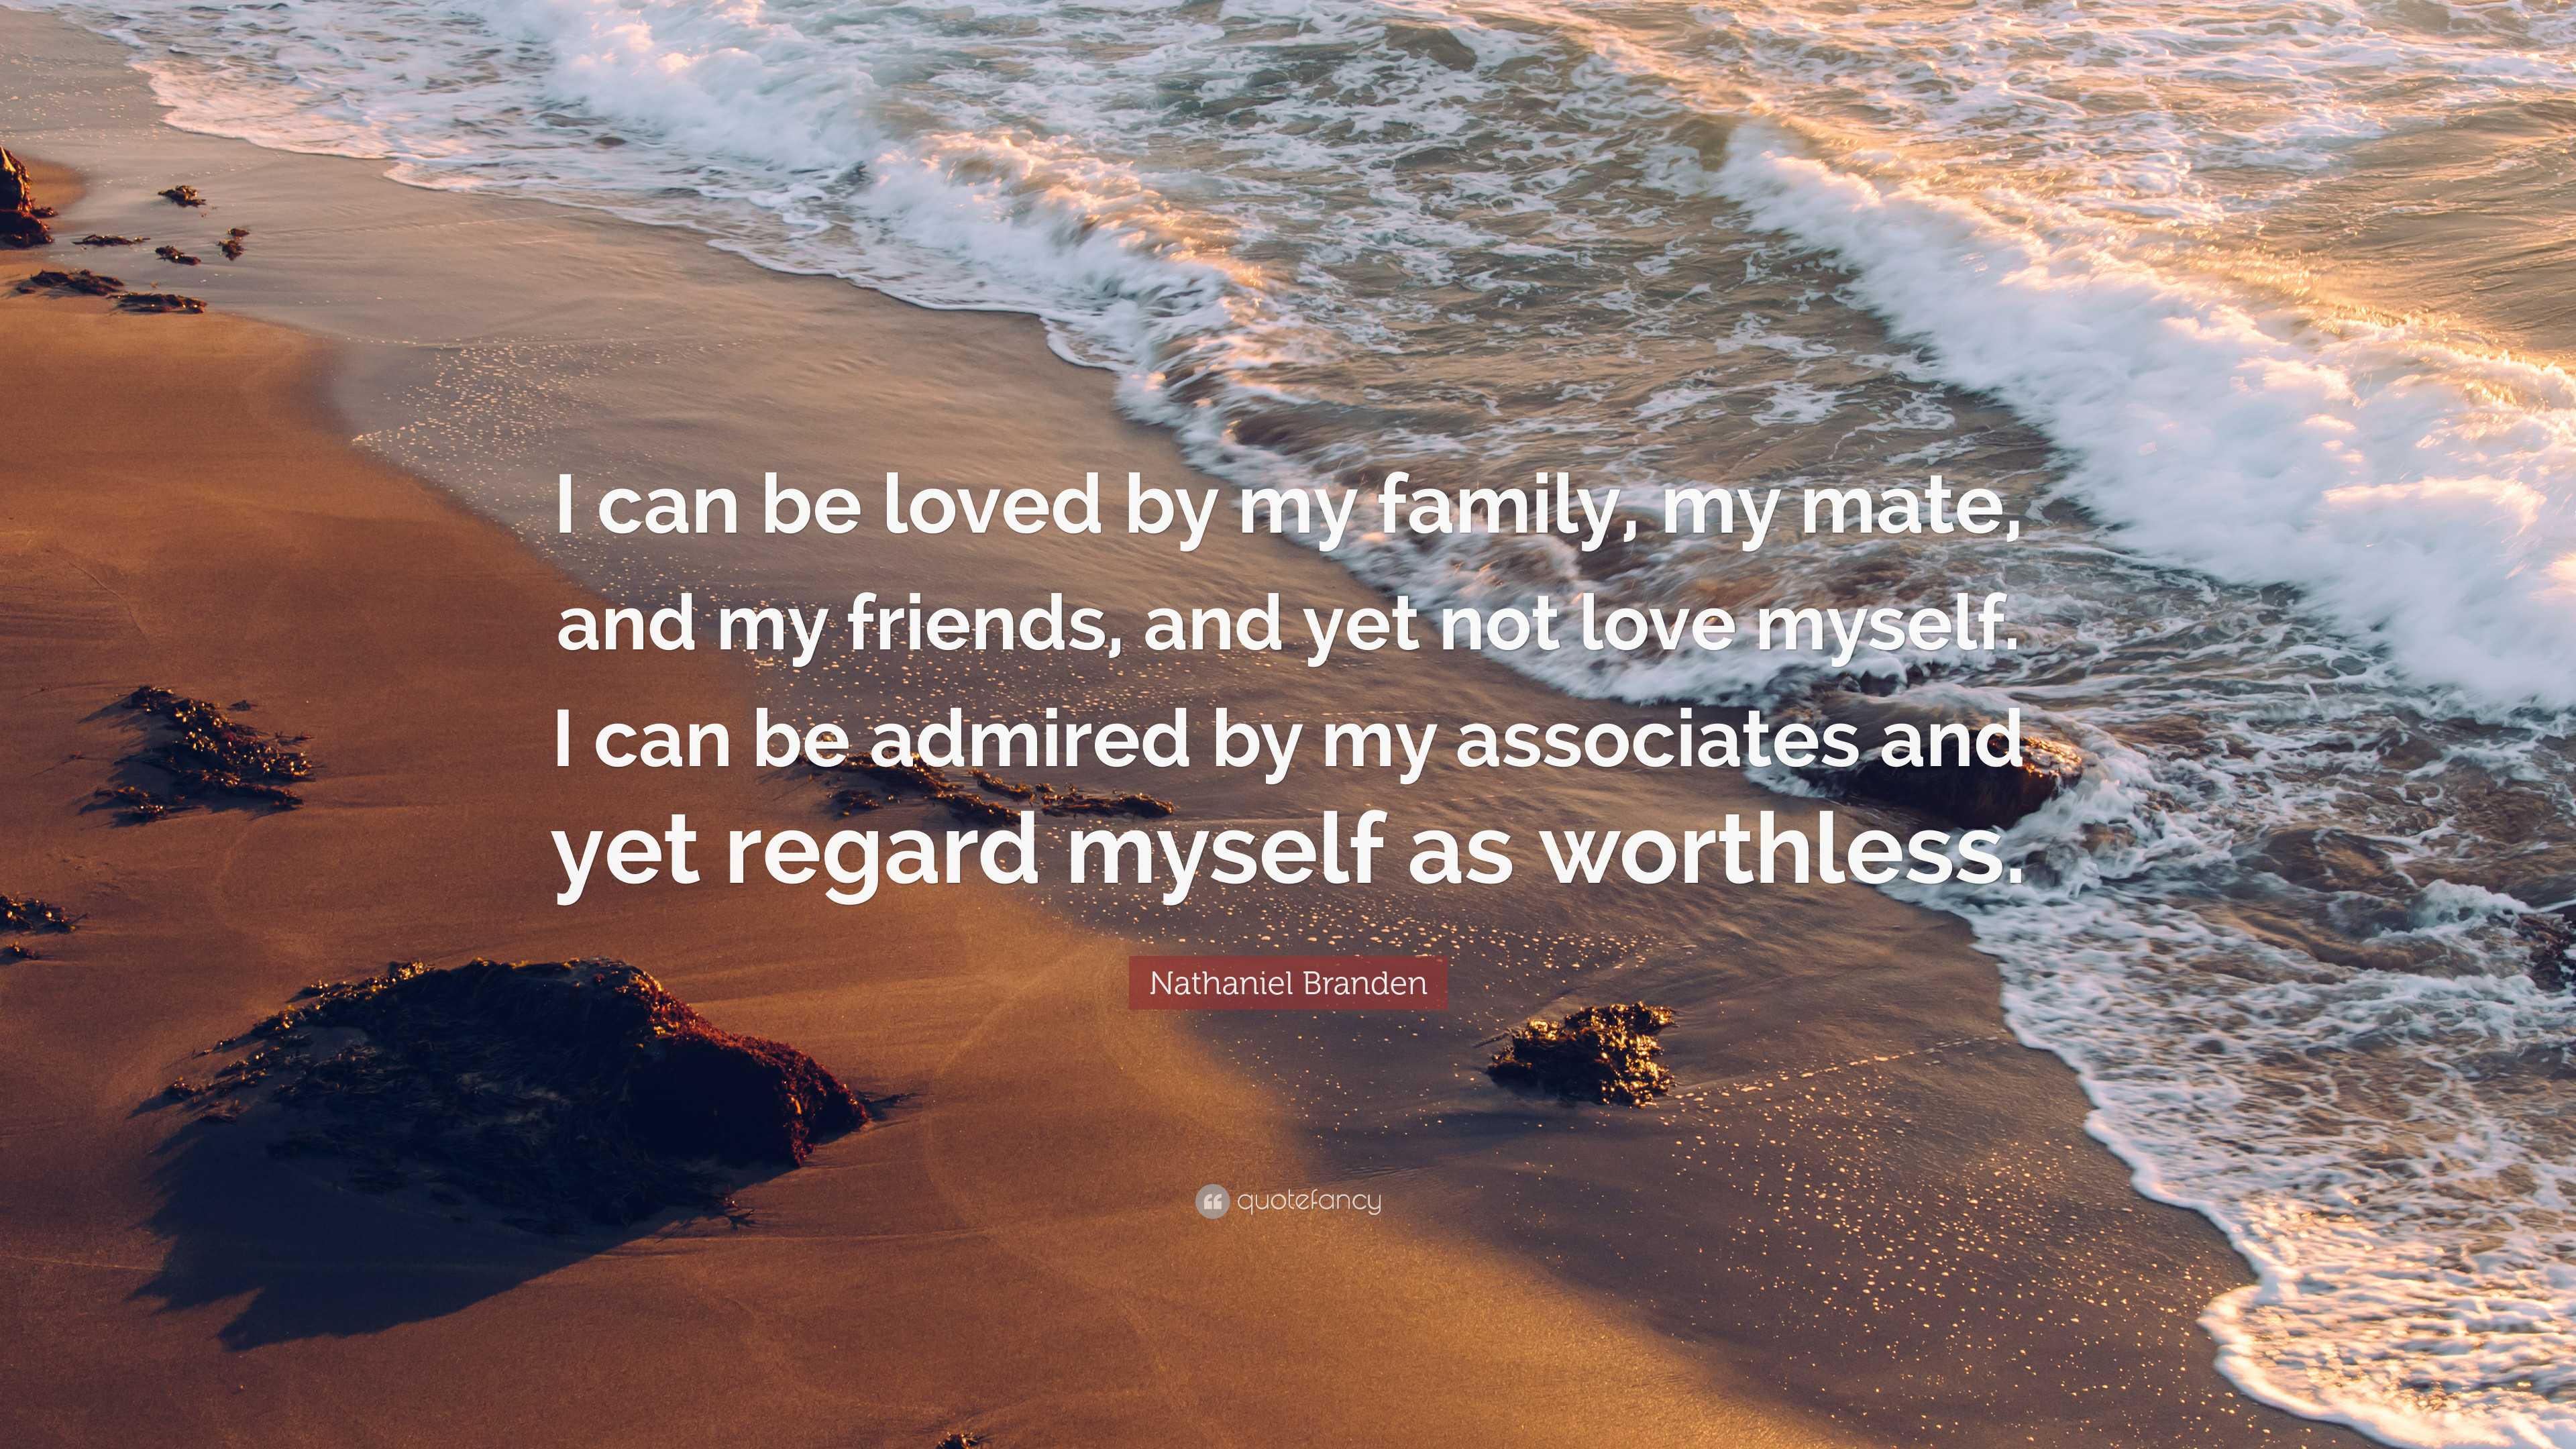 Nathaniel Branden Quote: “I can be loved by my family, my mate, and my ...